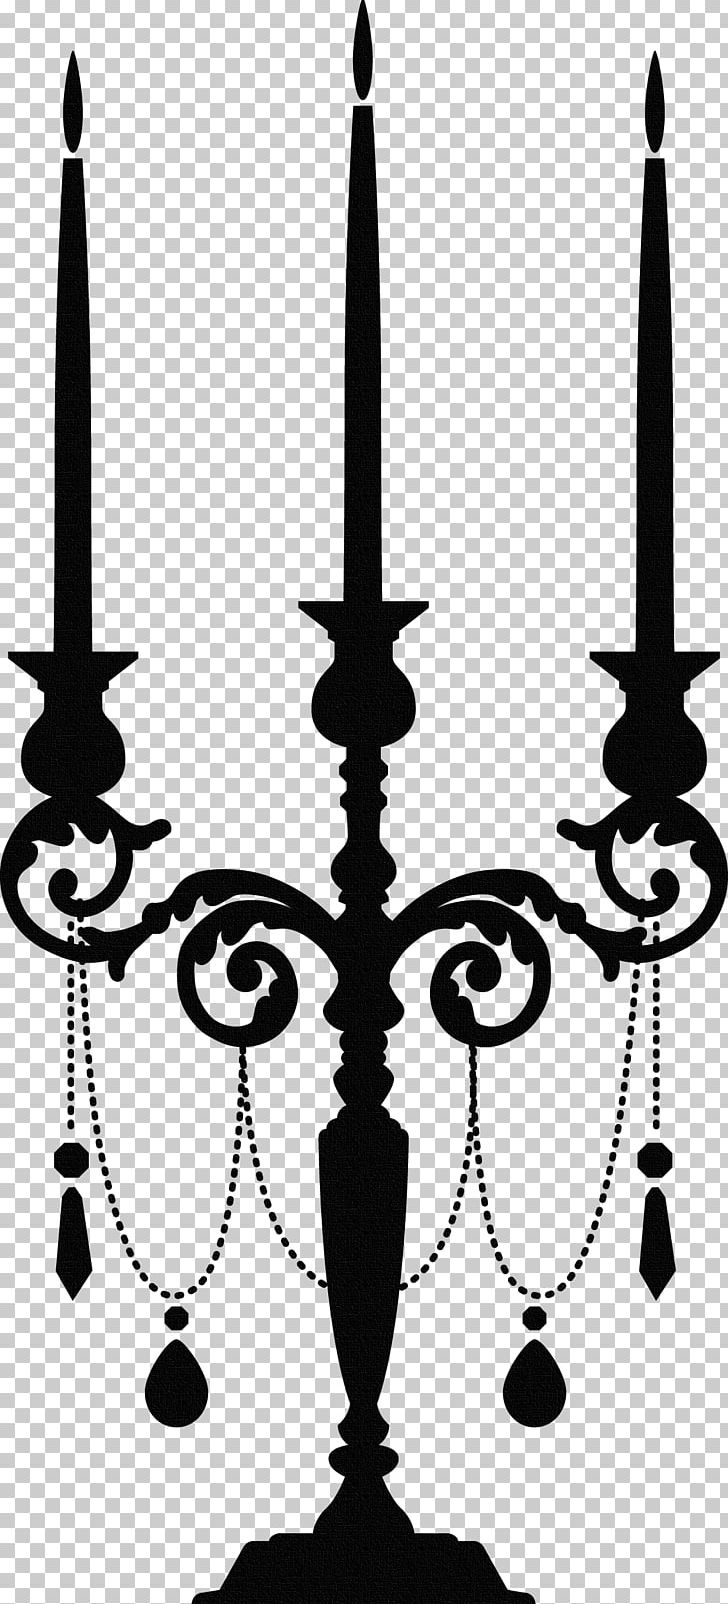 Wedding Cake Light Cupcake Birthday Cake Candle PNG, Clipart, Animals, Black And White, Cake, Candelabra, Candle Holder Free PNG Download